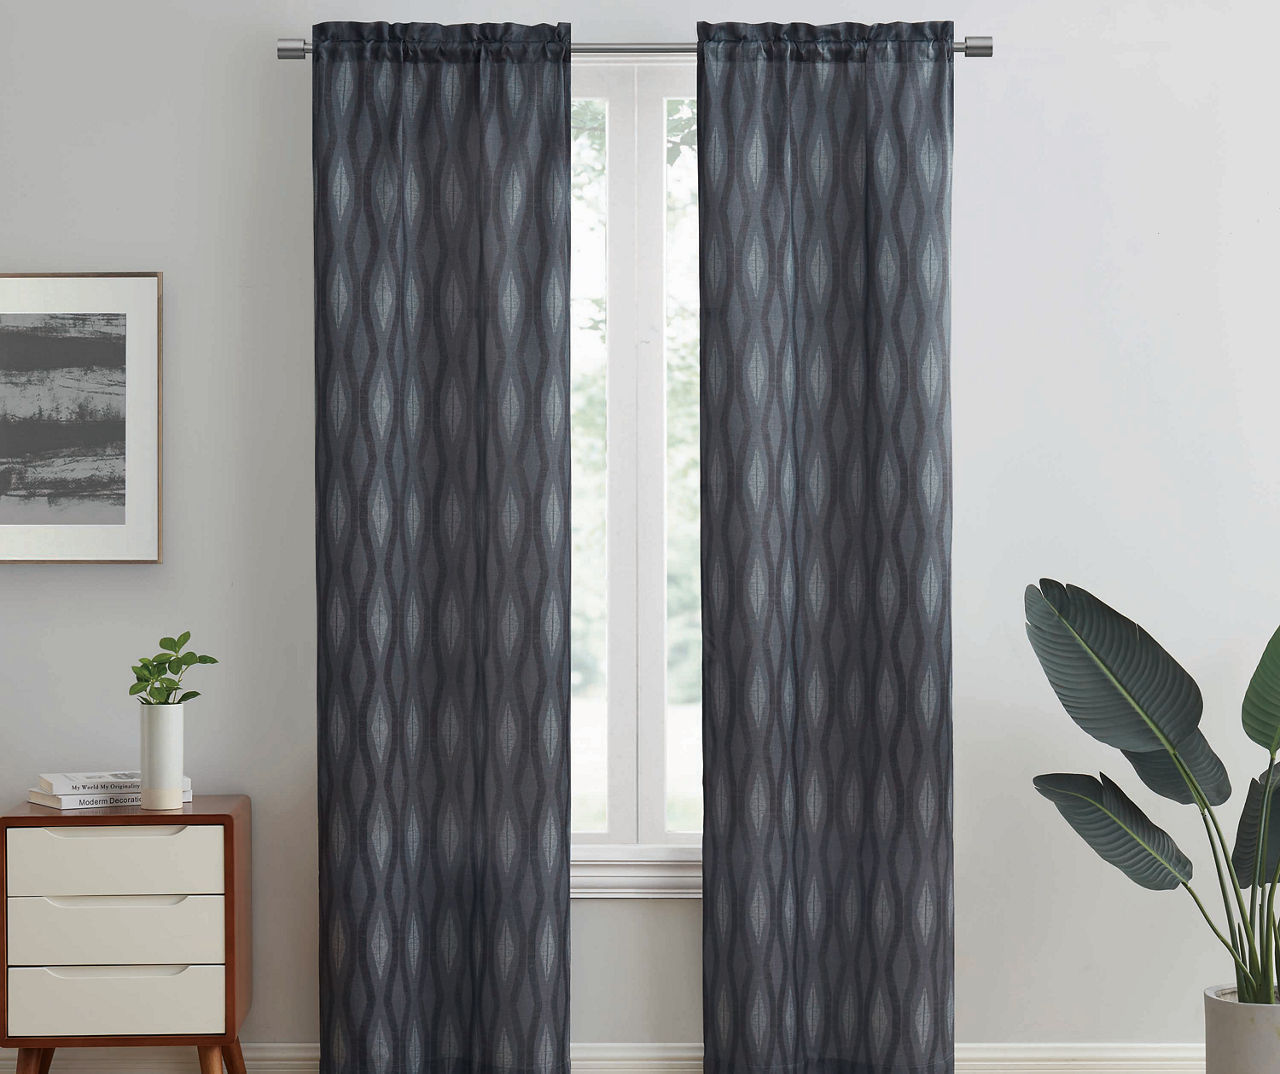 SD INDIRA PAIRCHARCOAL 84 INCH